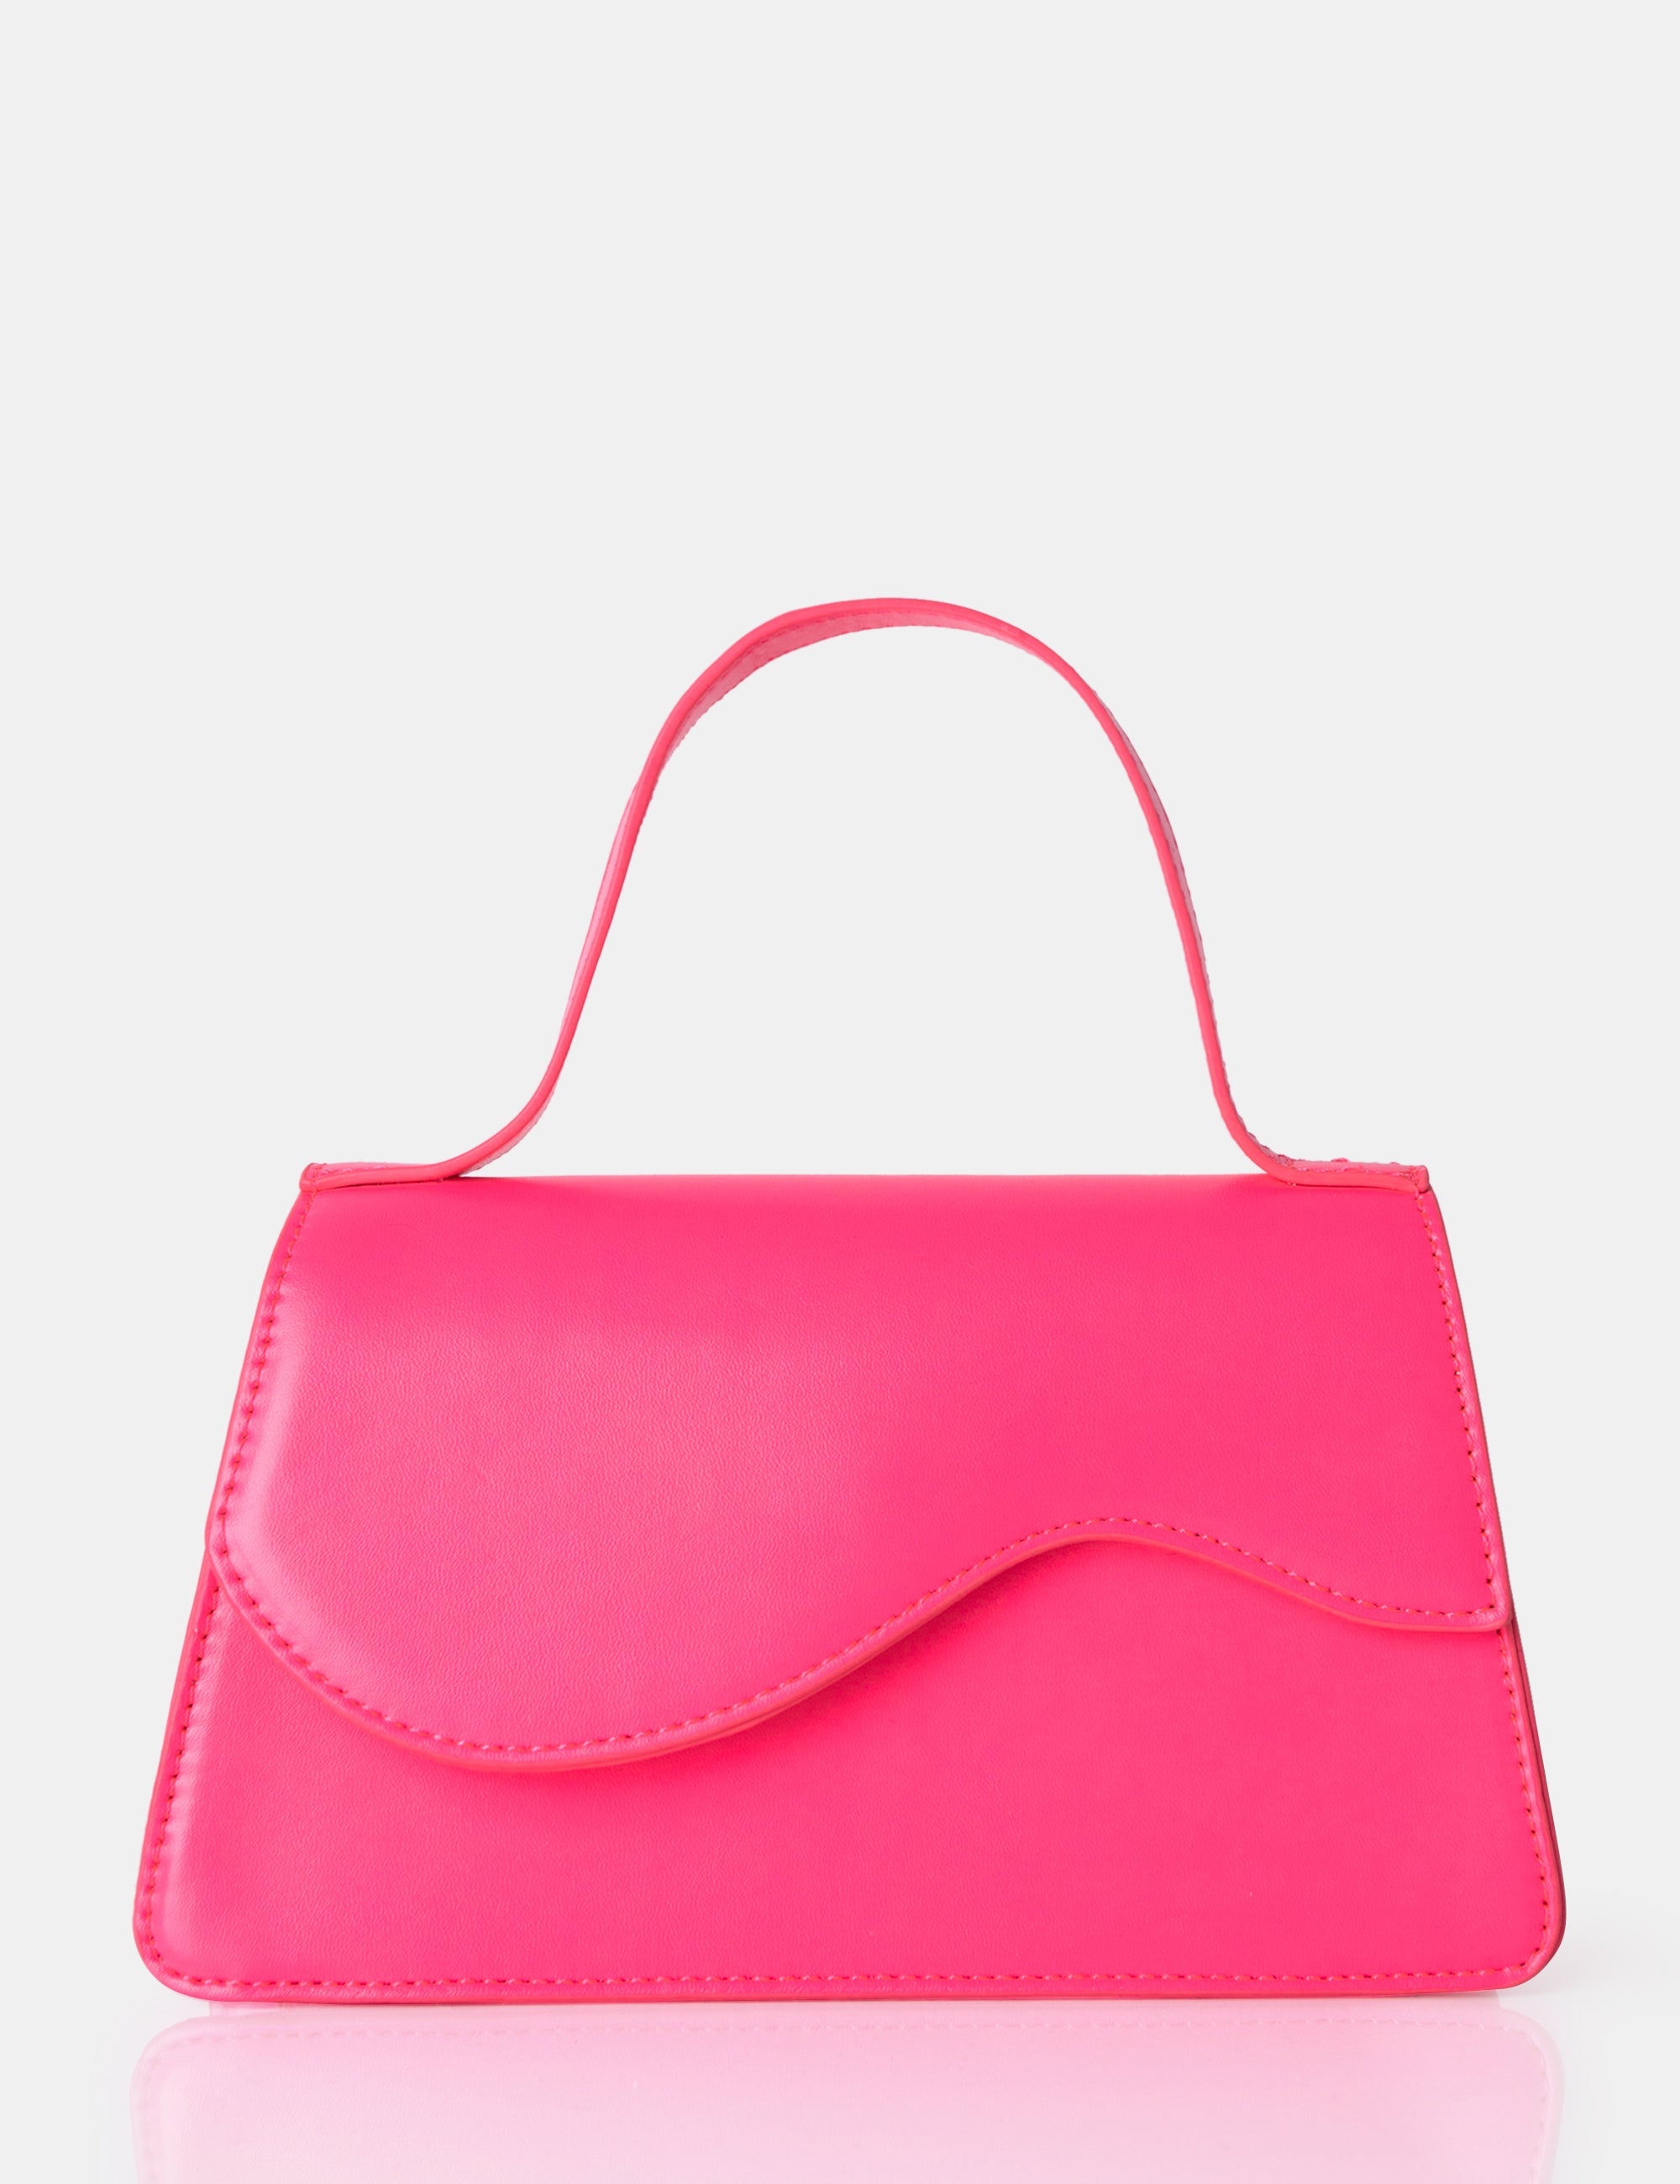 The Polly Bright Pink Croc Top Handle Mini Bag